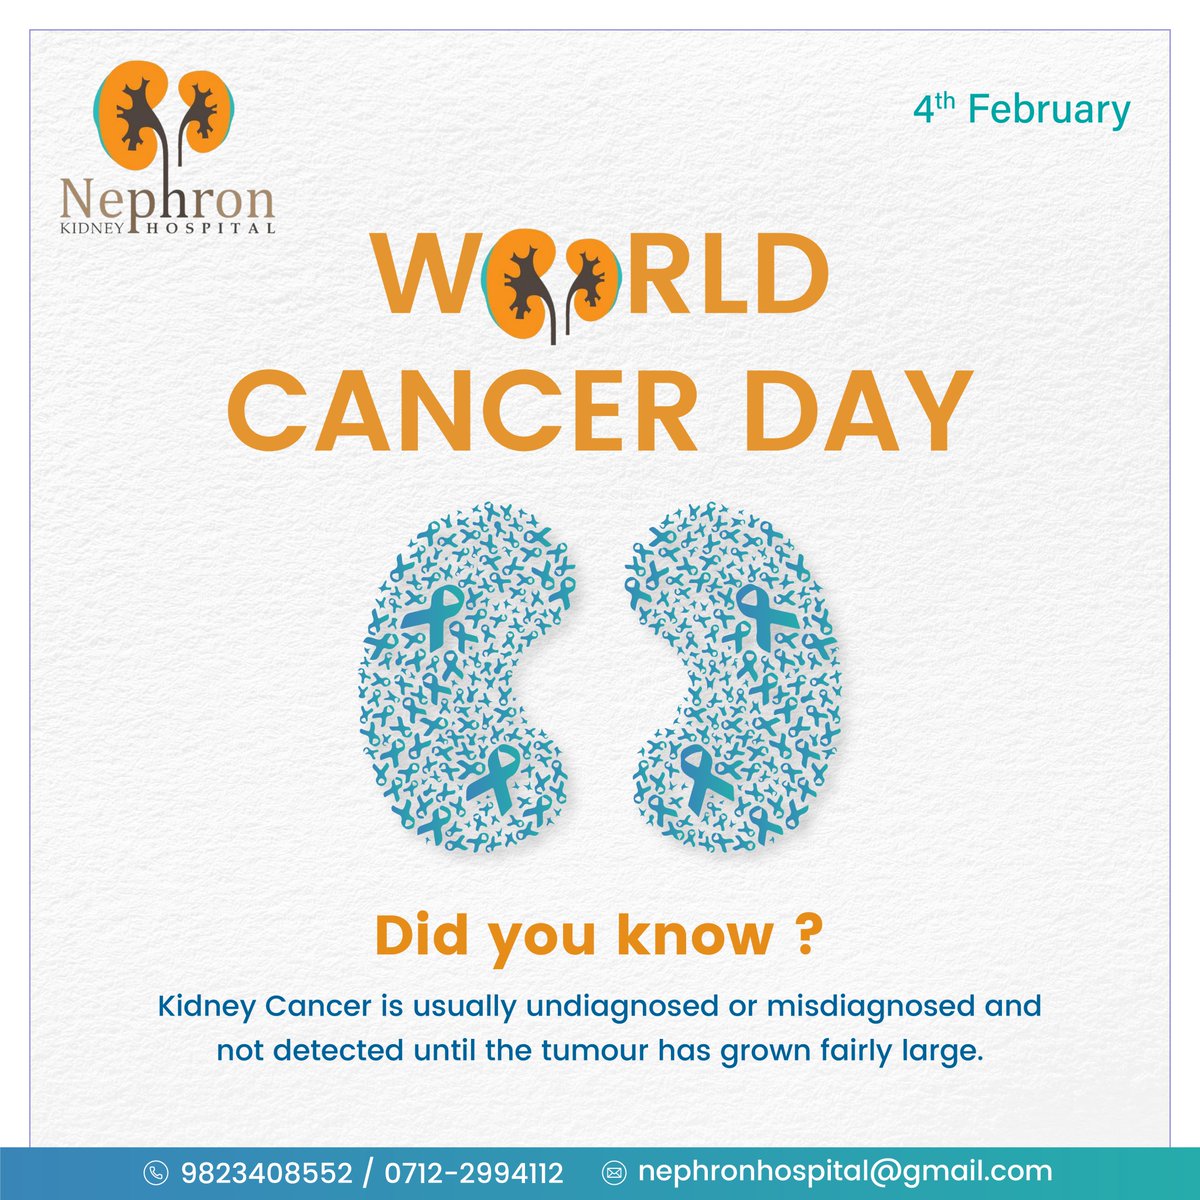 Kidney Cancer is usually undiagnosed or misdiagnosed and not deleted until the tumor has grown fairly large.

#worldcancerday #cancercare #health #cancerresearch  #beatcancer #cancerfree #breastcancerawareness #fightcancer #lifeaftercancer #cancerlife #mycancerdiaries